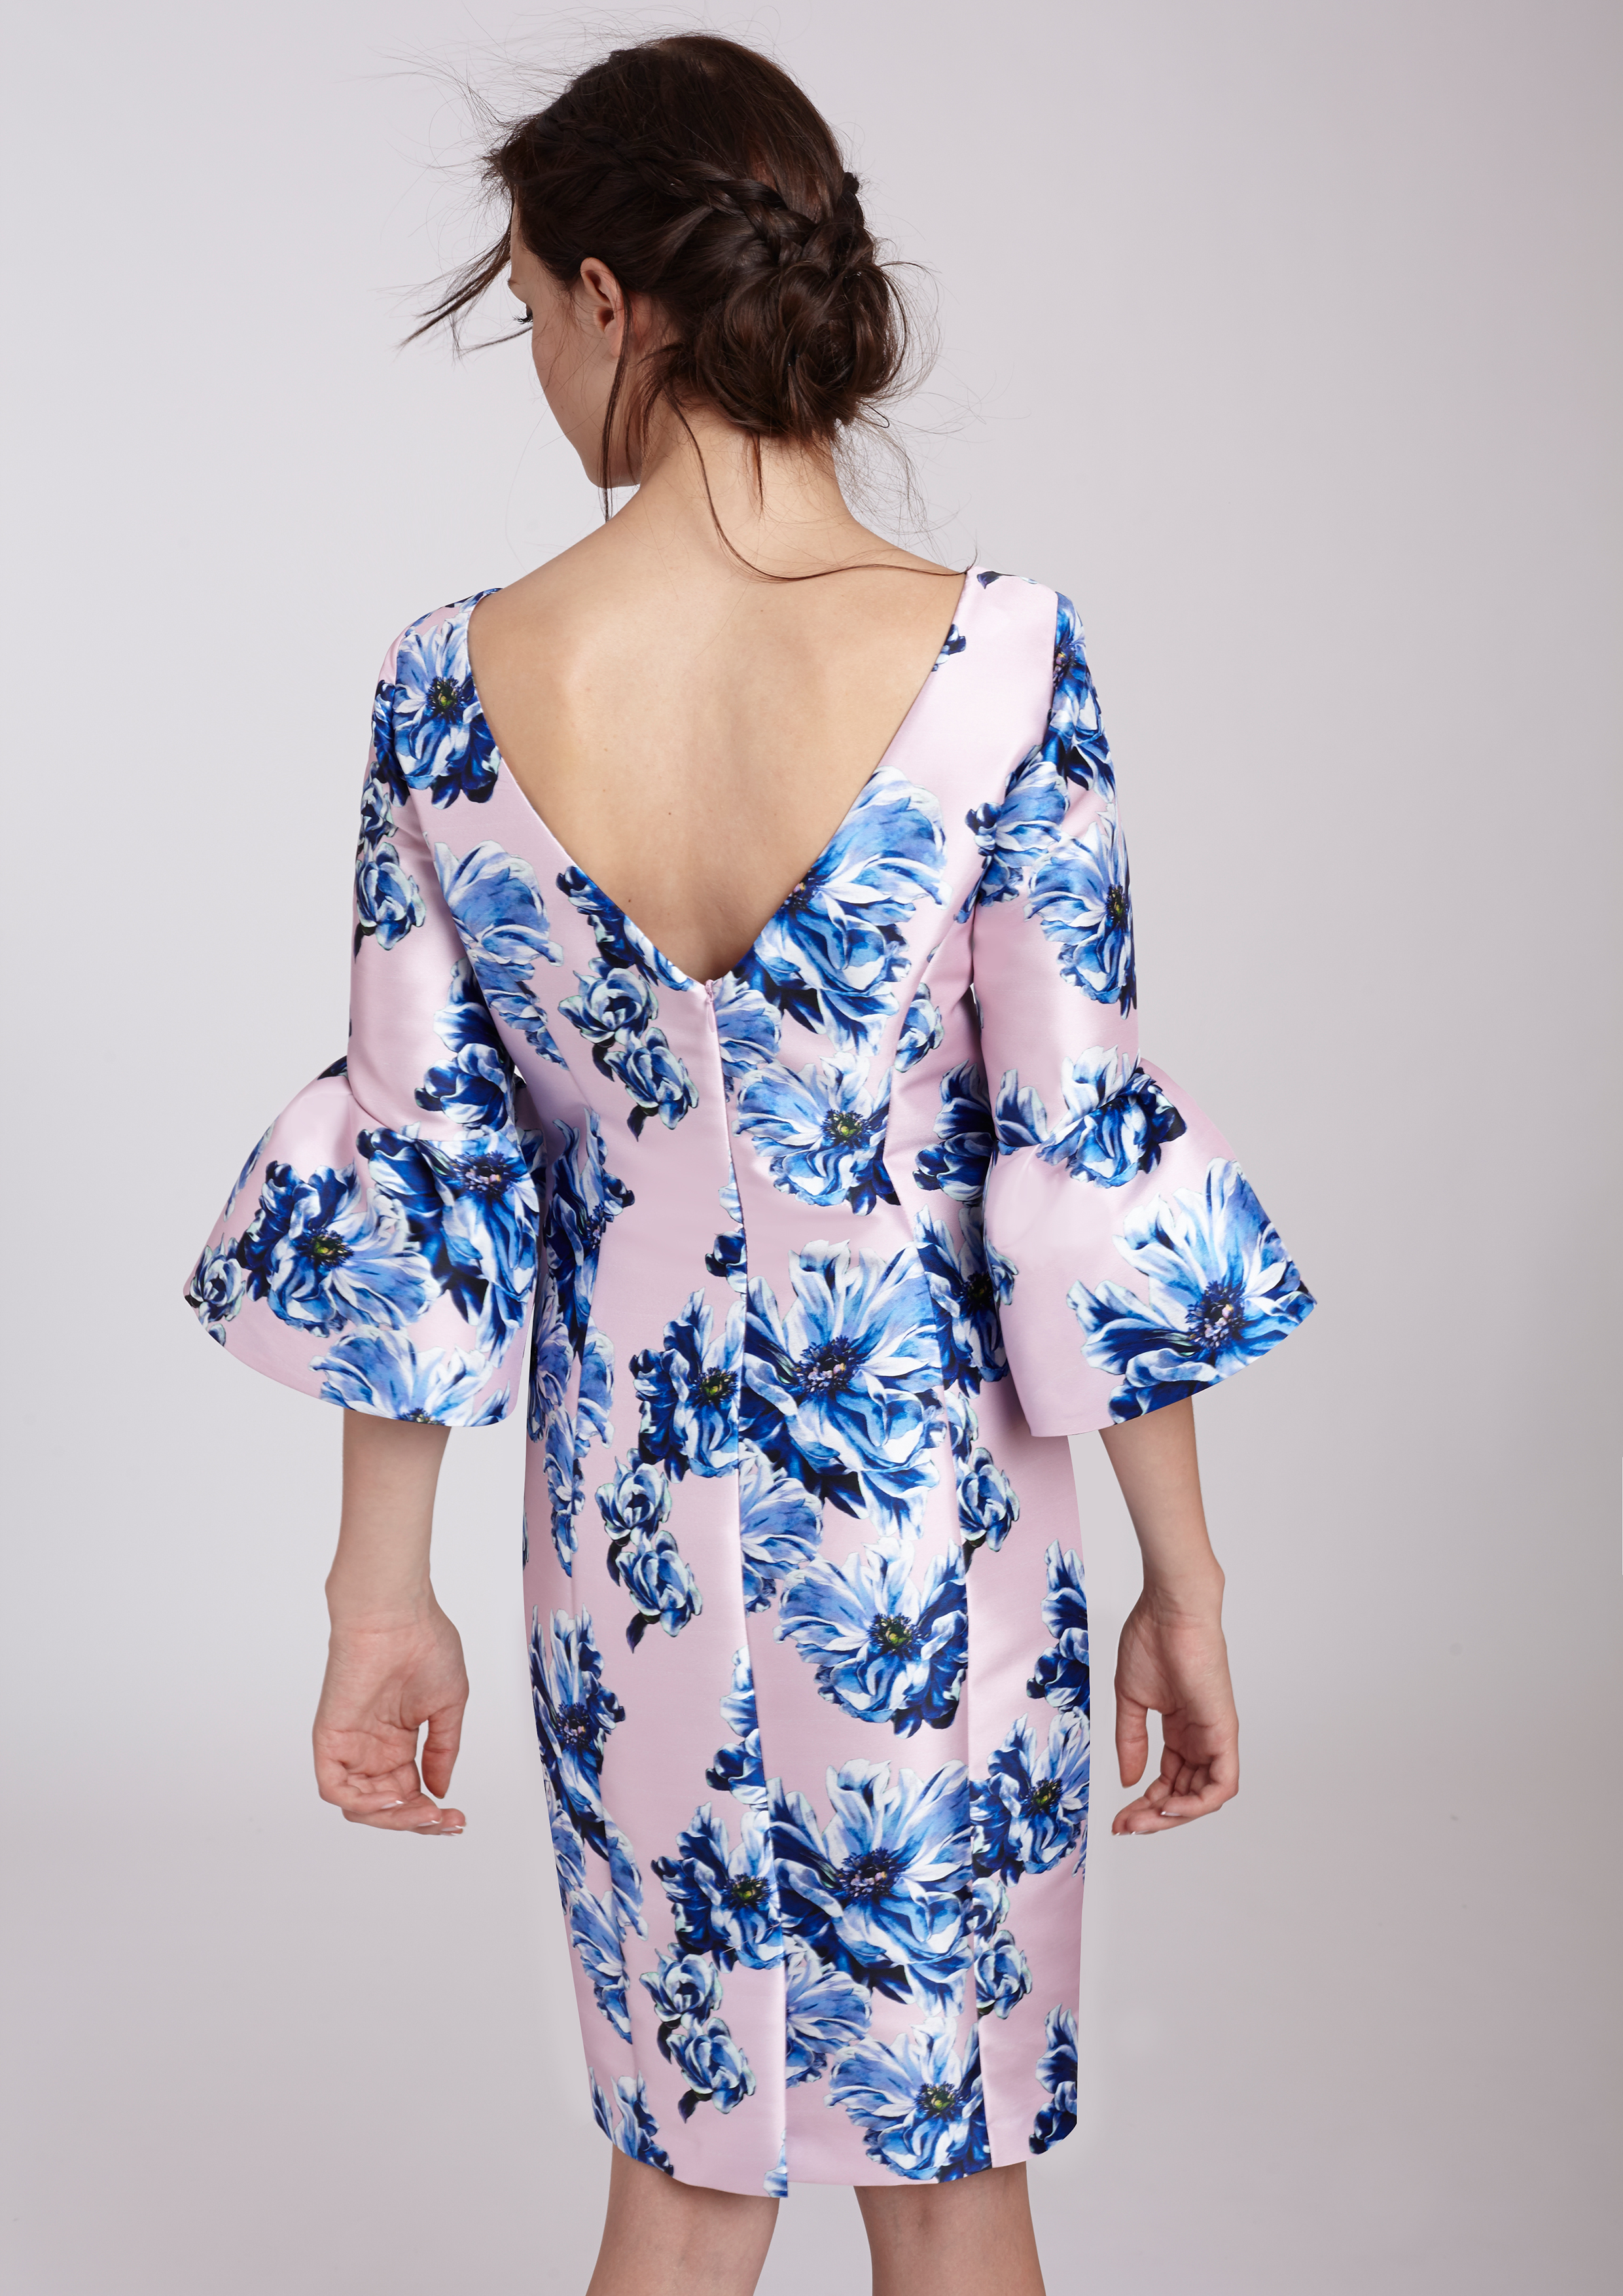 Printed dress with three-quarter length sleeves